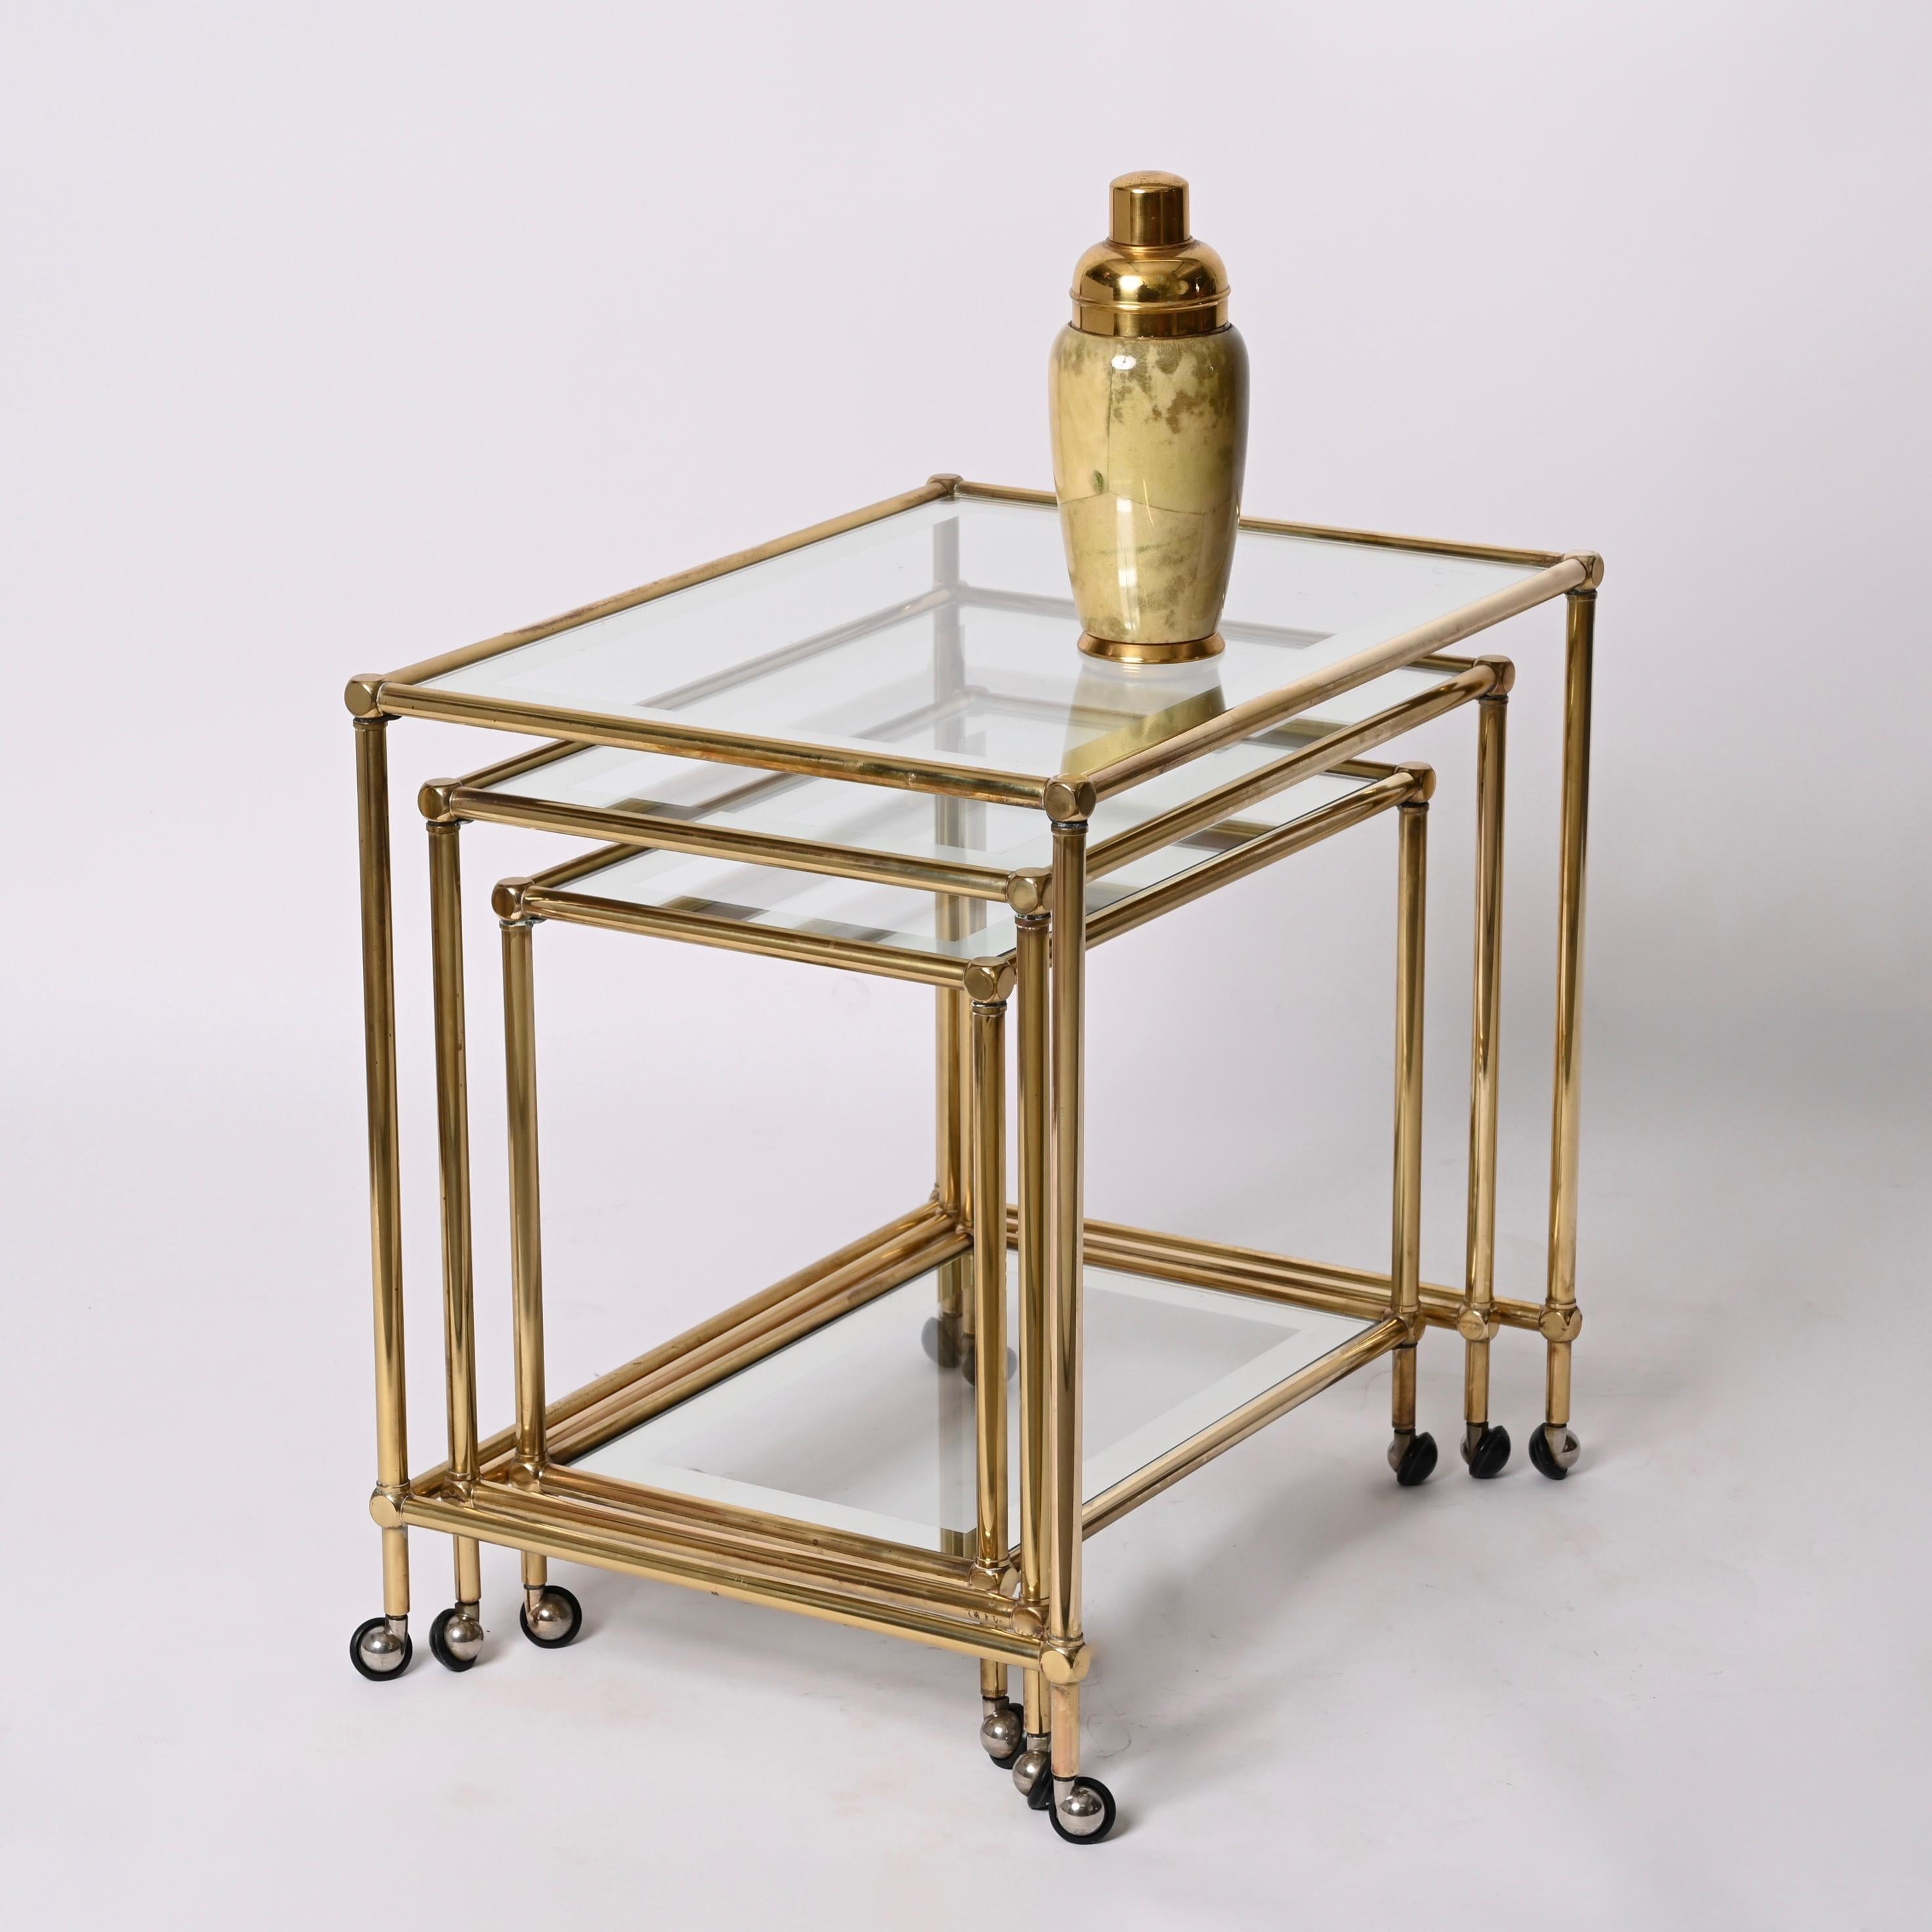 Set of Brass Mirrored Border with Glass Top Nesting Tables, Maison Jansen, 1970s For Sale 9